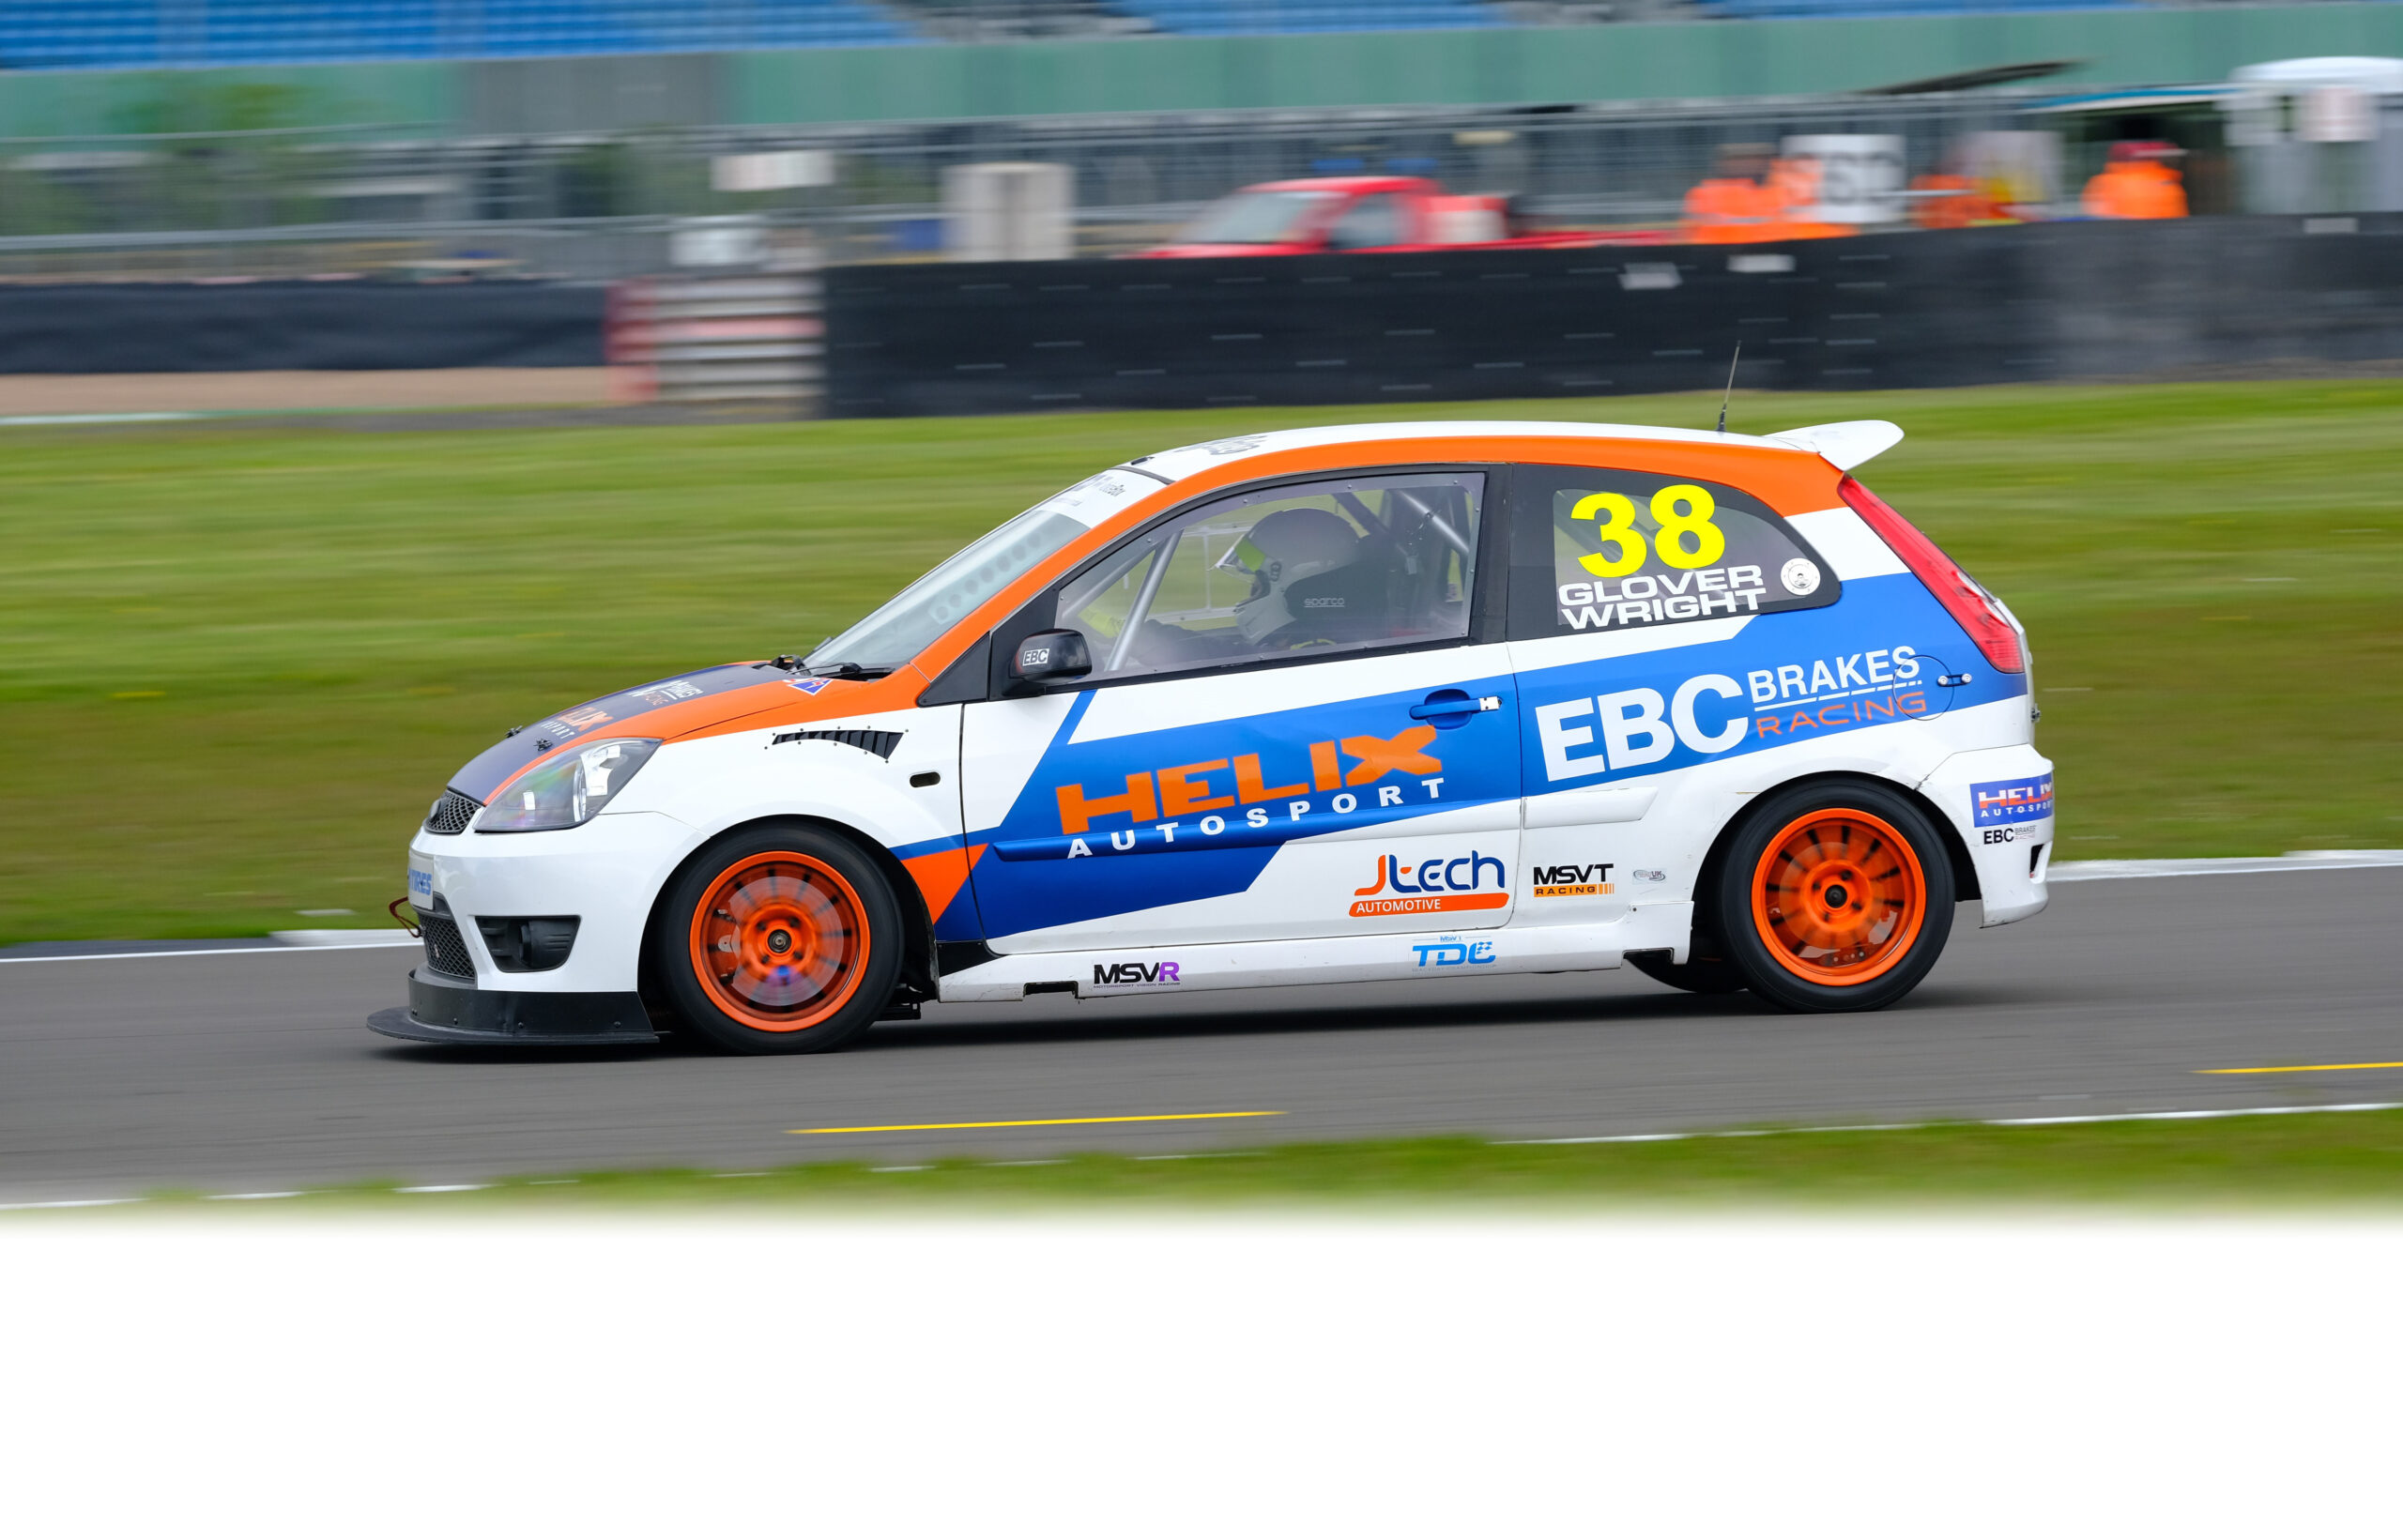 RP-X™-Equipped Fiesta Race Team Secures Class Victory in Debutant Trackday Championship Round